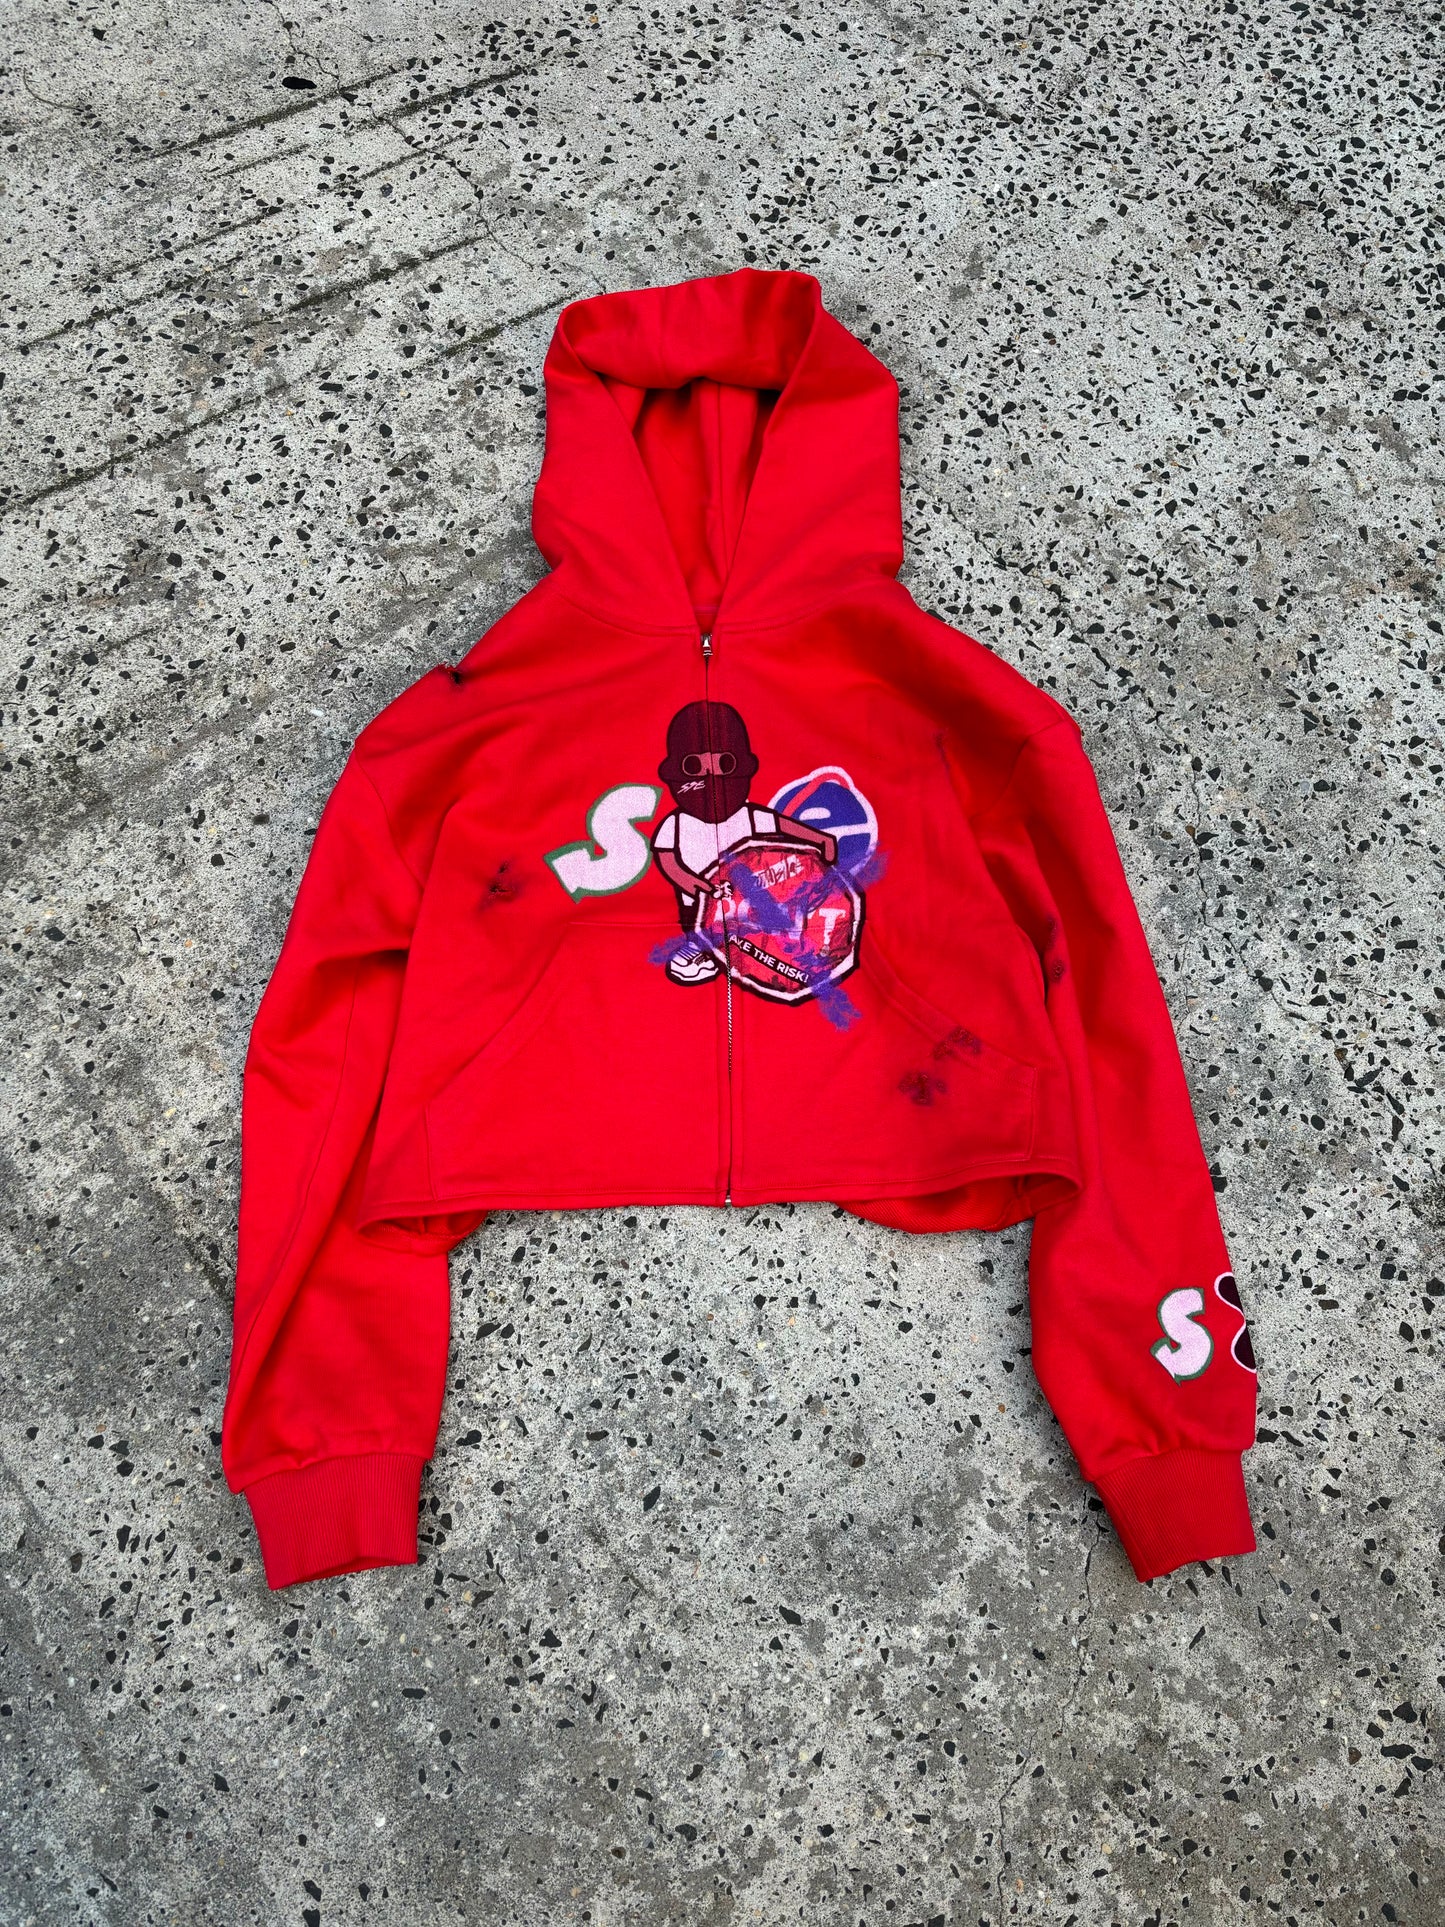 Southside Ent Cropped Risk Hoodie